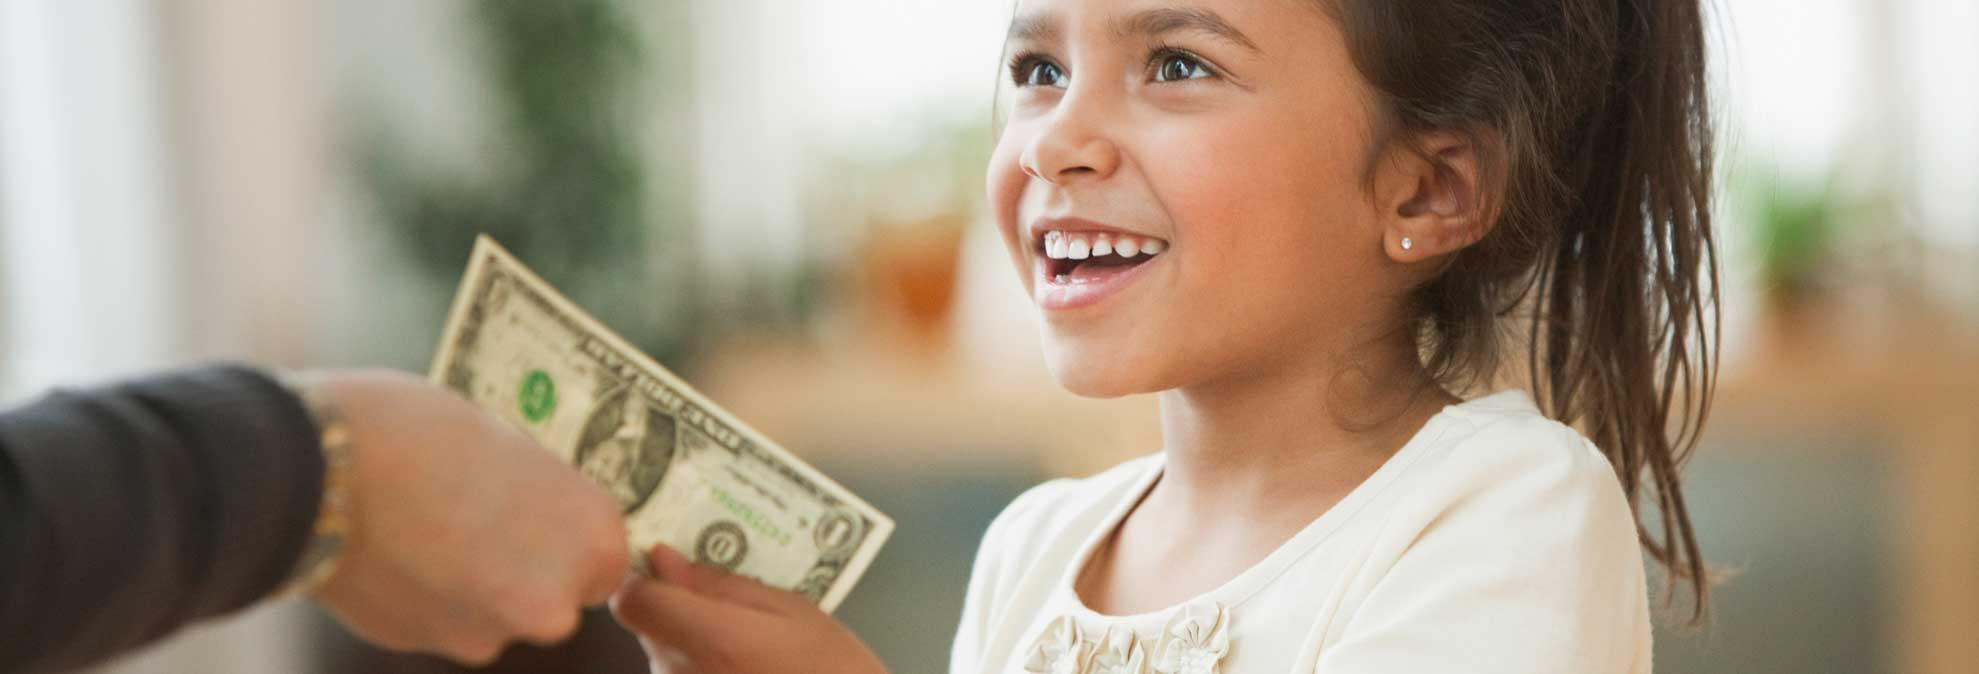 Cash Gift To Child
 The Right Way to Give your Kid an Allowance Consumer Reports